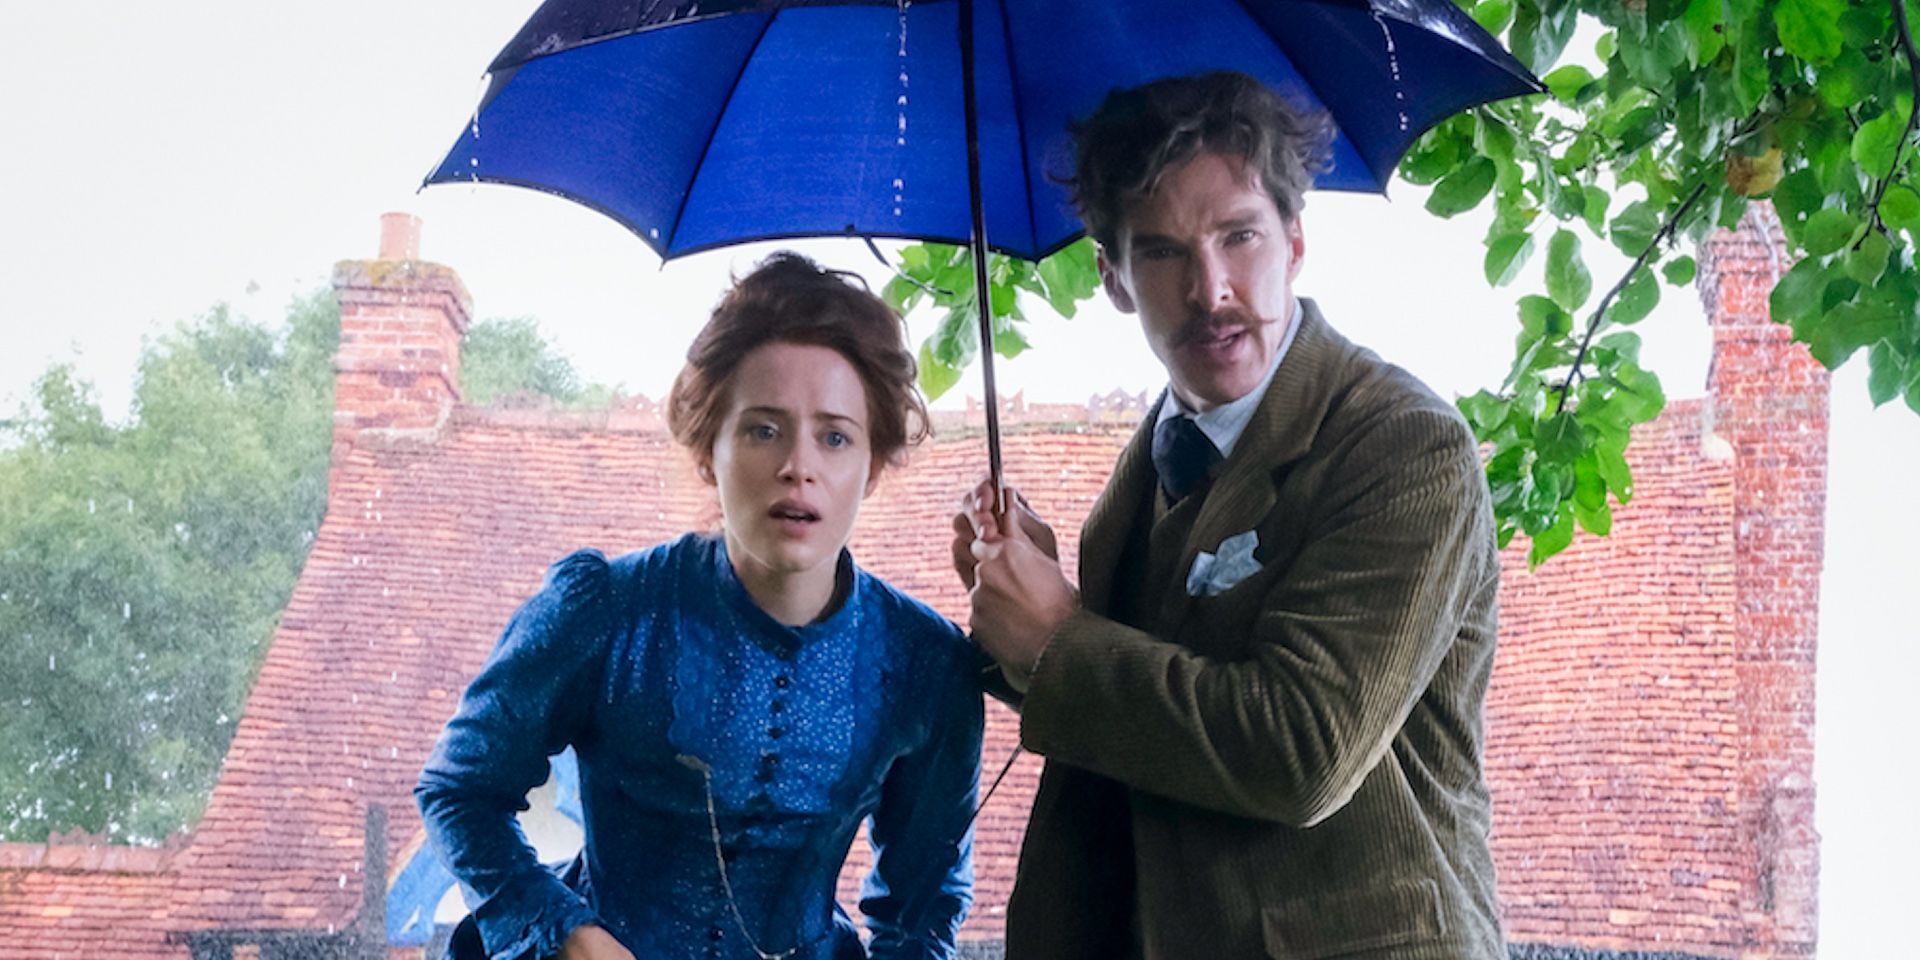 Claire Foy and Benedict Cumberbatch in Louis Wain on Amazon Prime